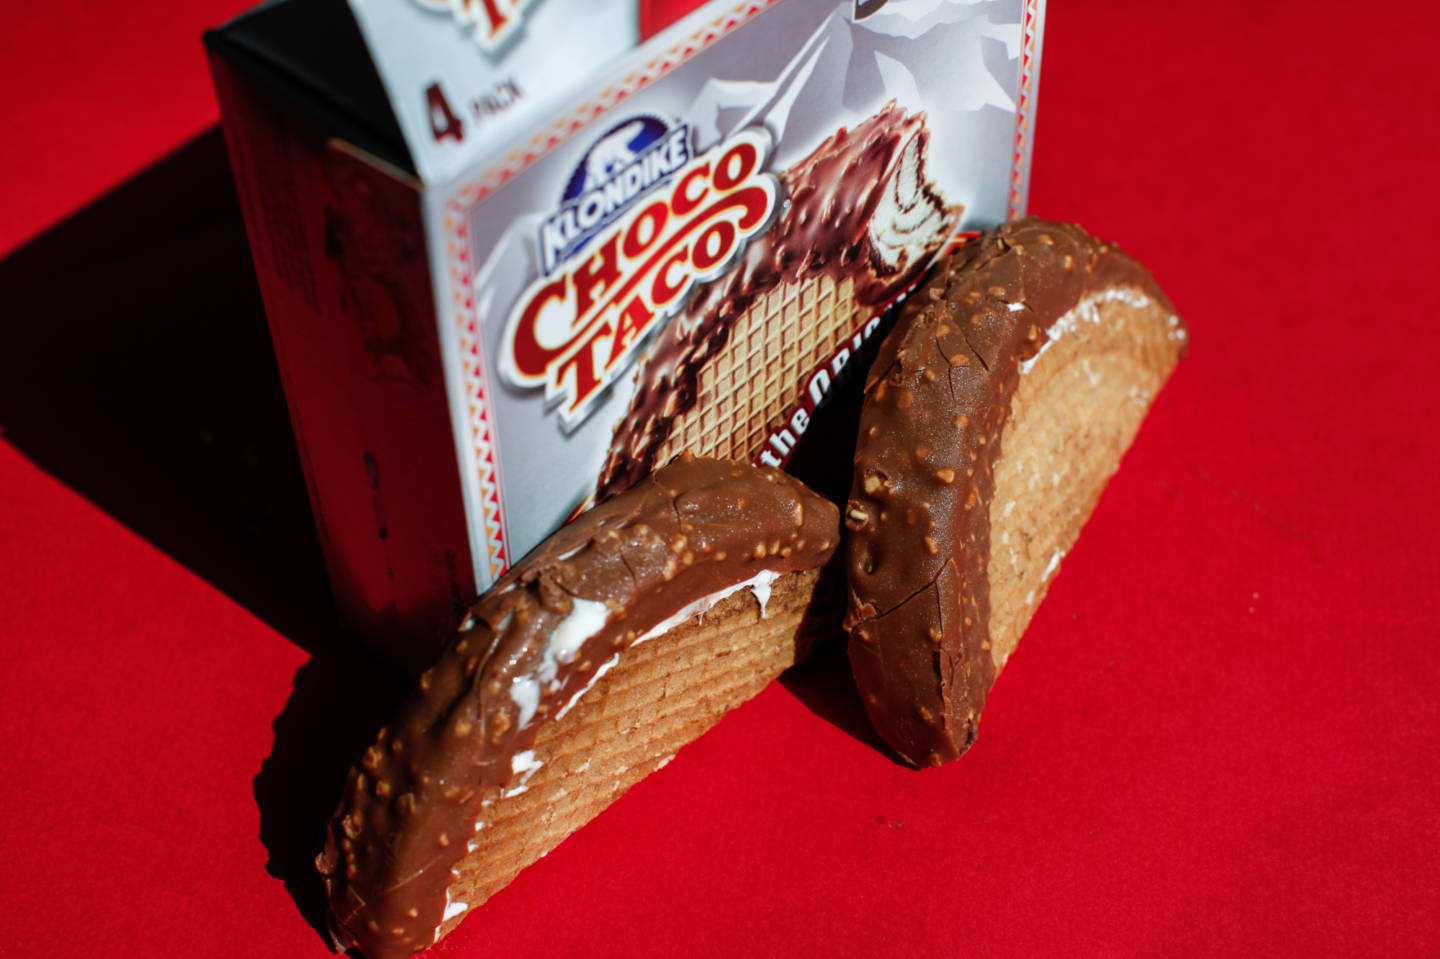 The Choco Taco: Investigating The Mystery Behind A Classic American